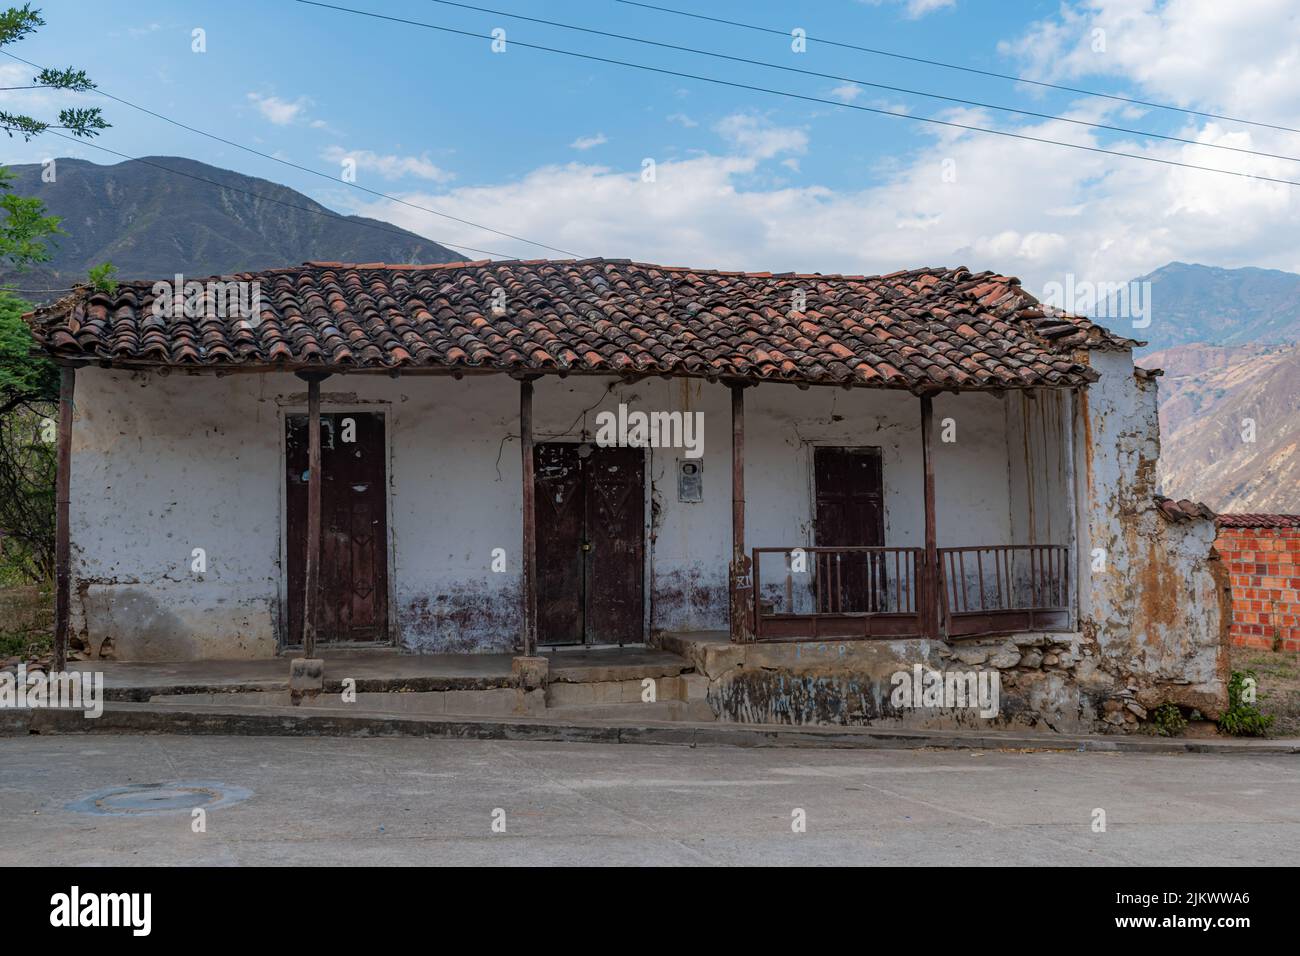 An old stone building with a weathered tiled roof. The landscapes are from the Chicamocha canyon in the region of Santander-Colombia Stock Photo